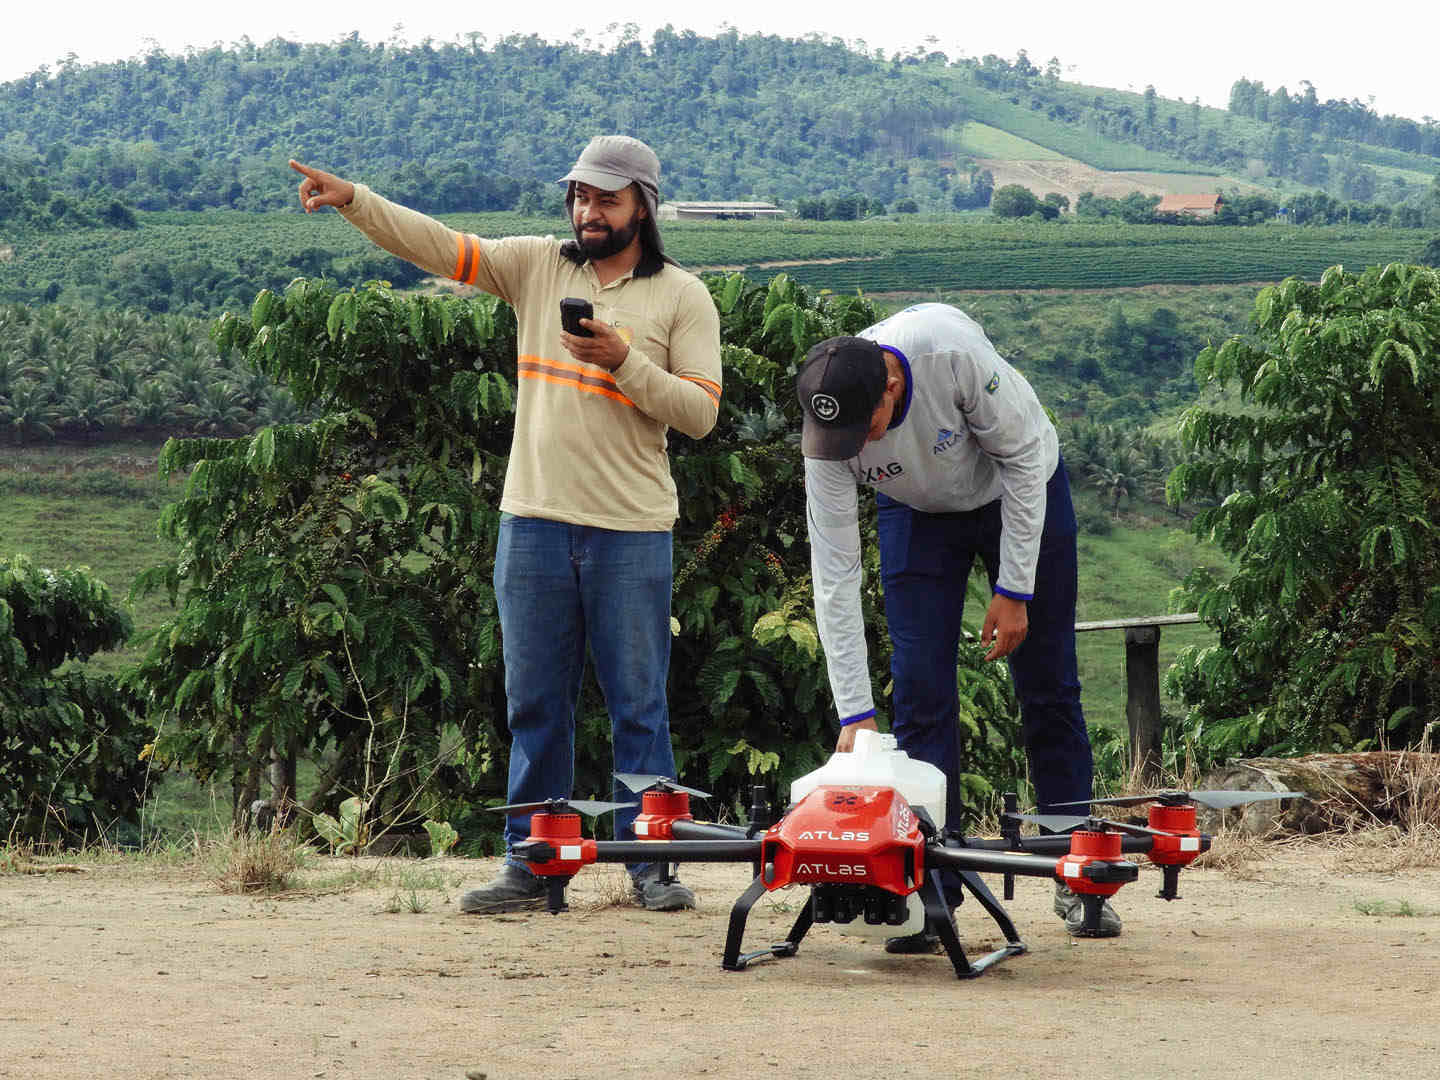 More than coffee, banana, or coco, the drone is the doorway through which I am accessible to various crops and people from different places I never came across before. I'm thrilled by these adventures that broaden my mind.